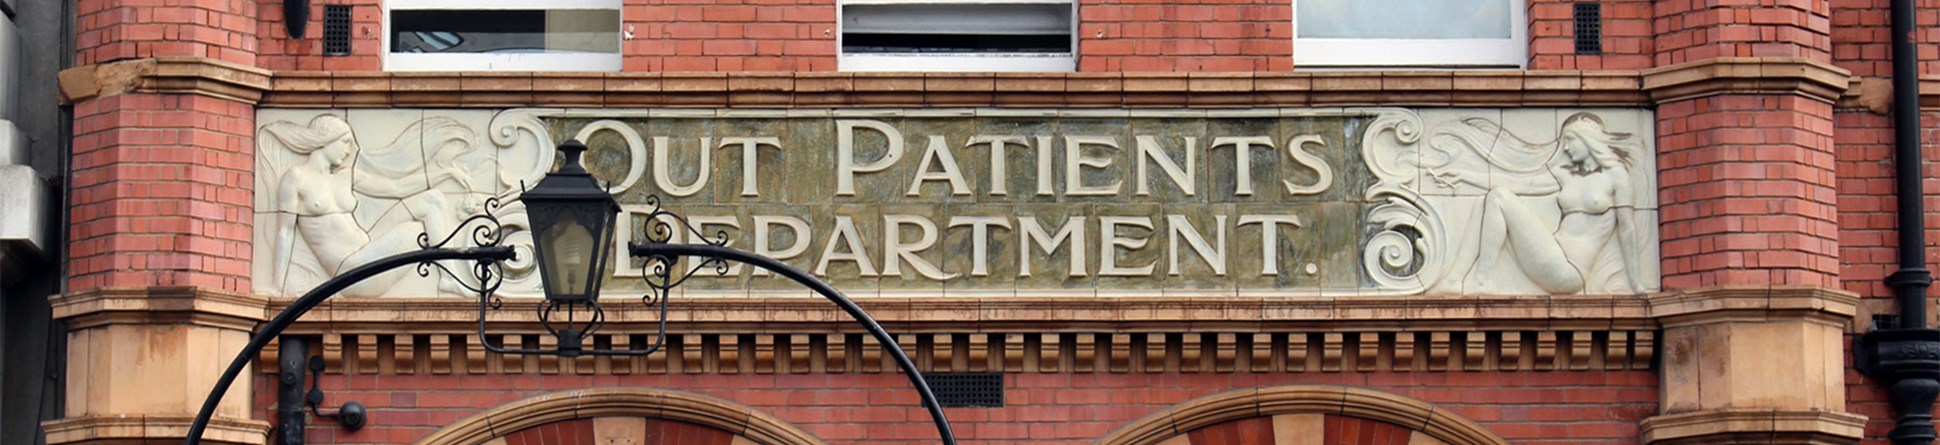 Entrance with the words 'Out Patients Department' engraved in the stone flanked by two women on either side. A lantern above the entrance gate partly obscures the view of the stone carving on the left.